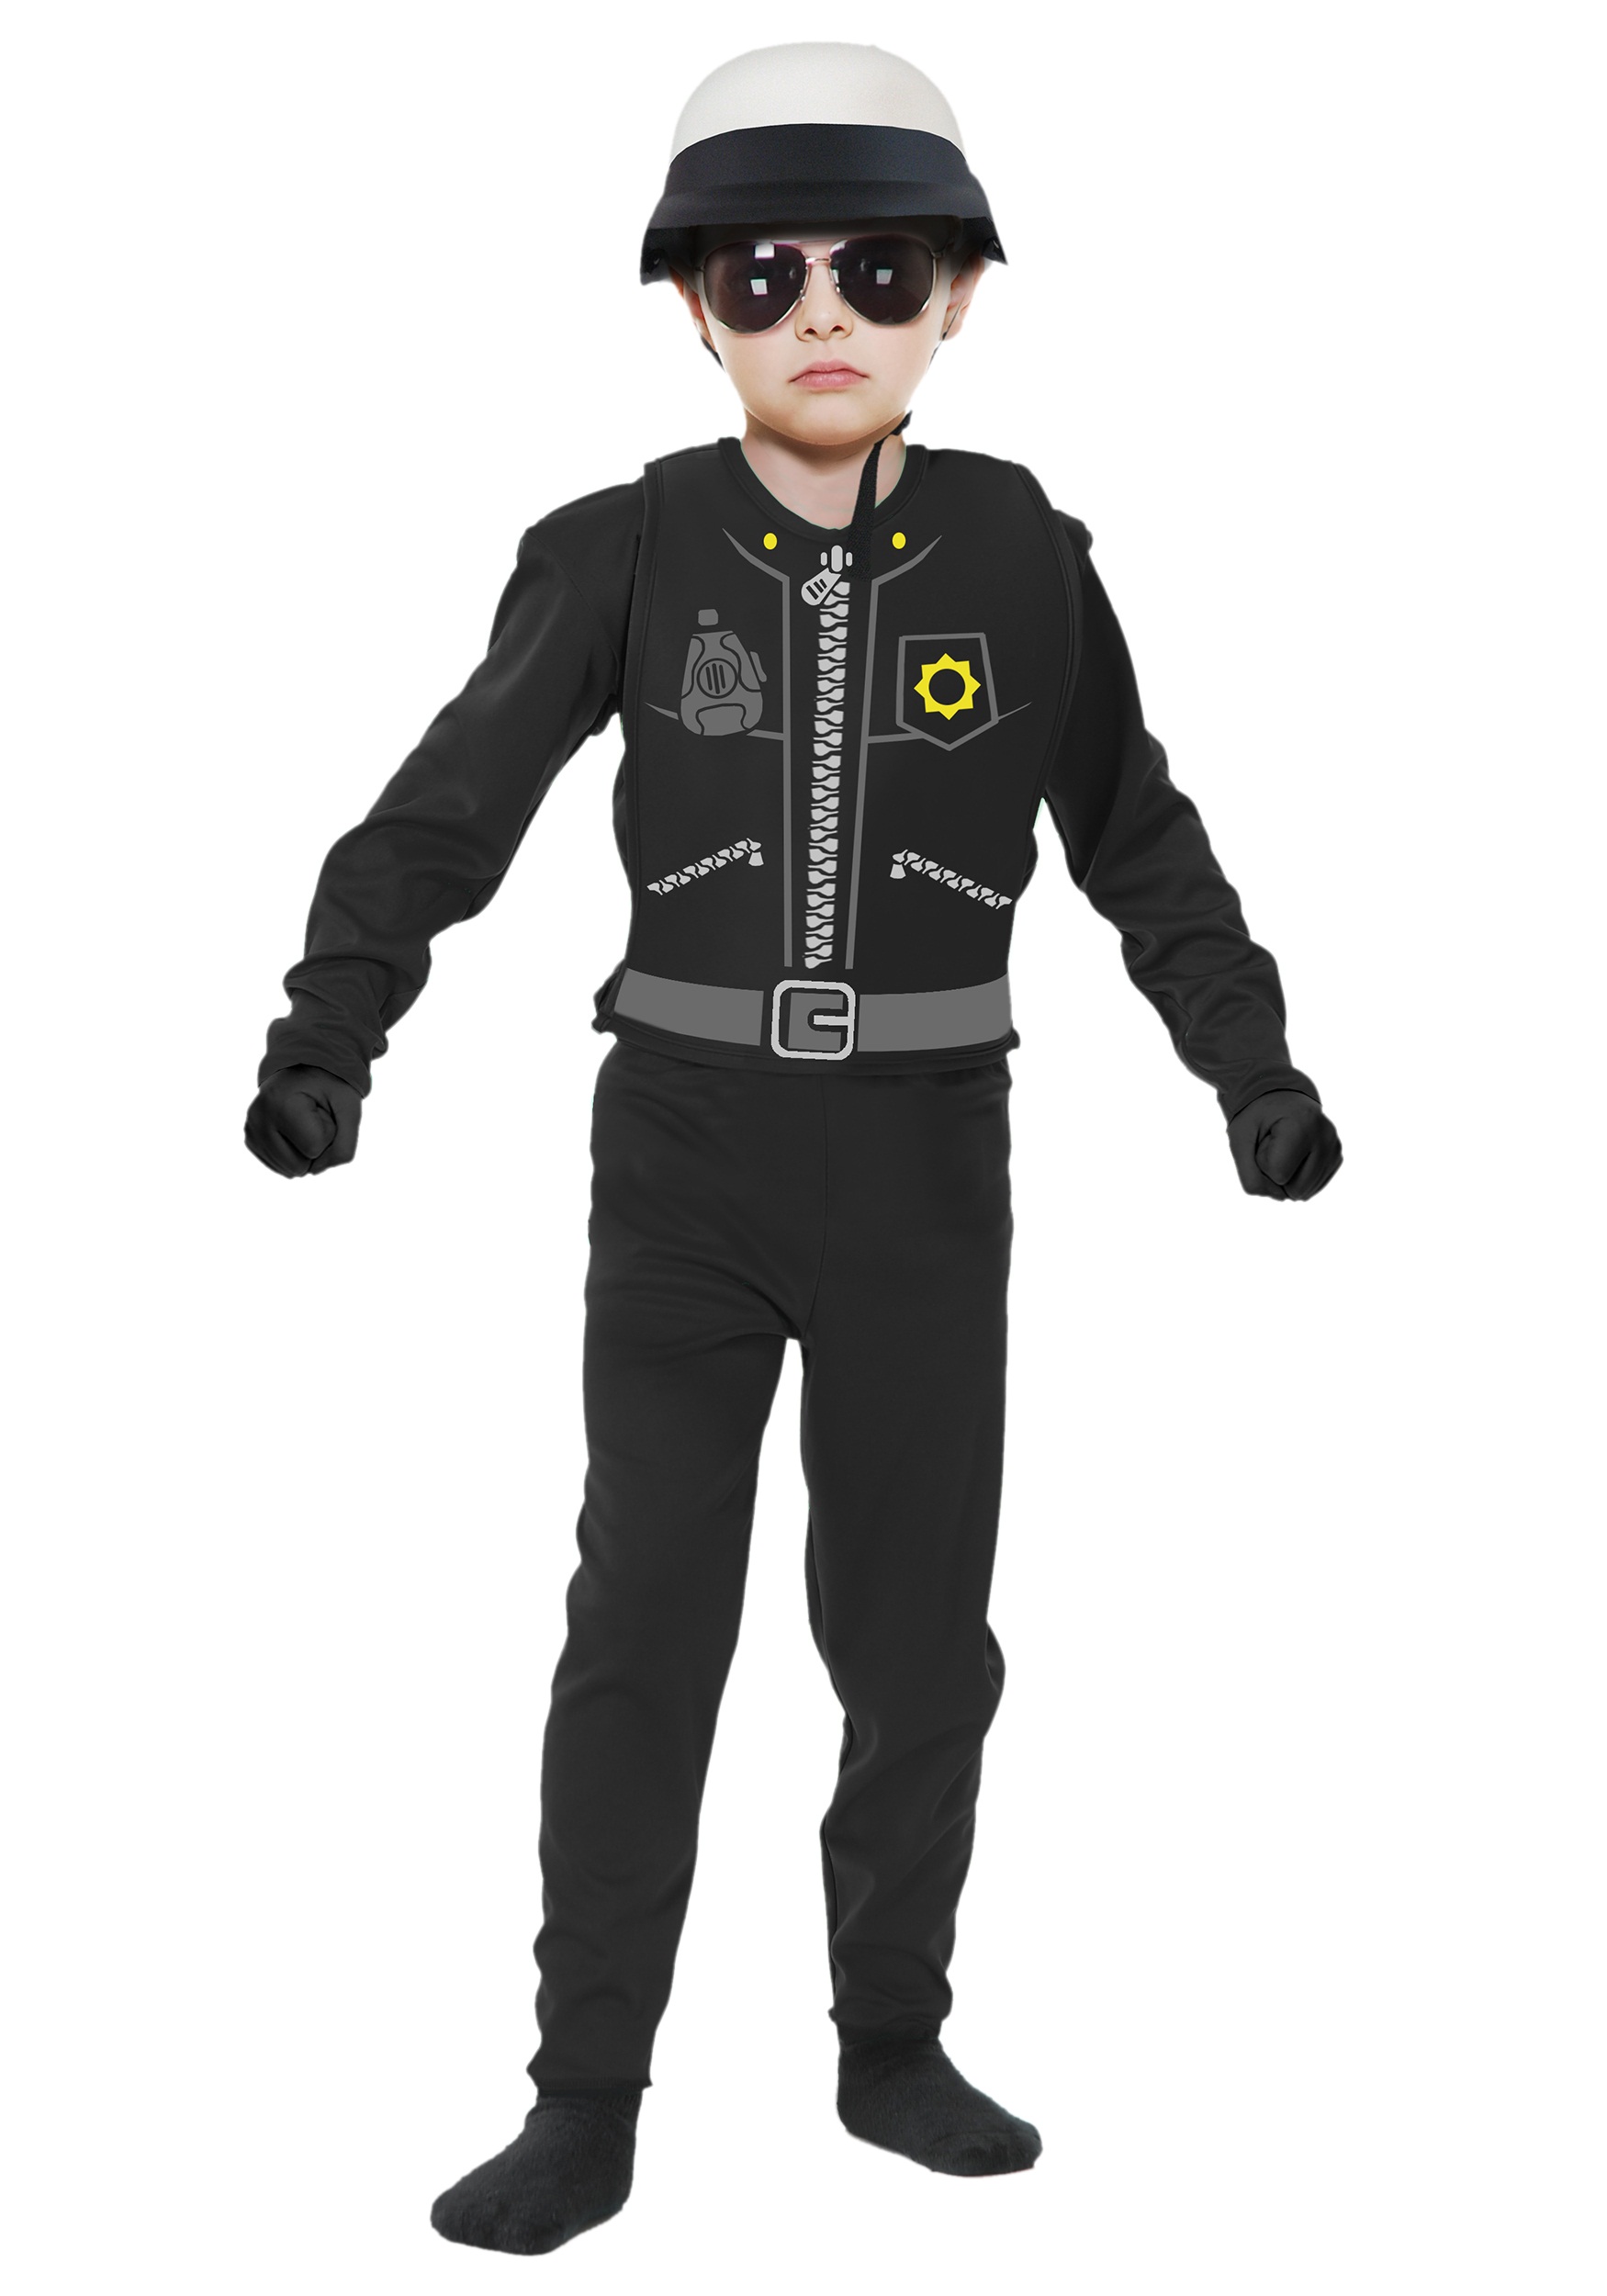 police lego costume Shop Clothing & Shoes Online